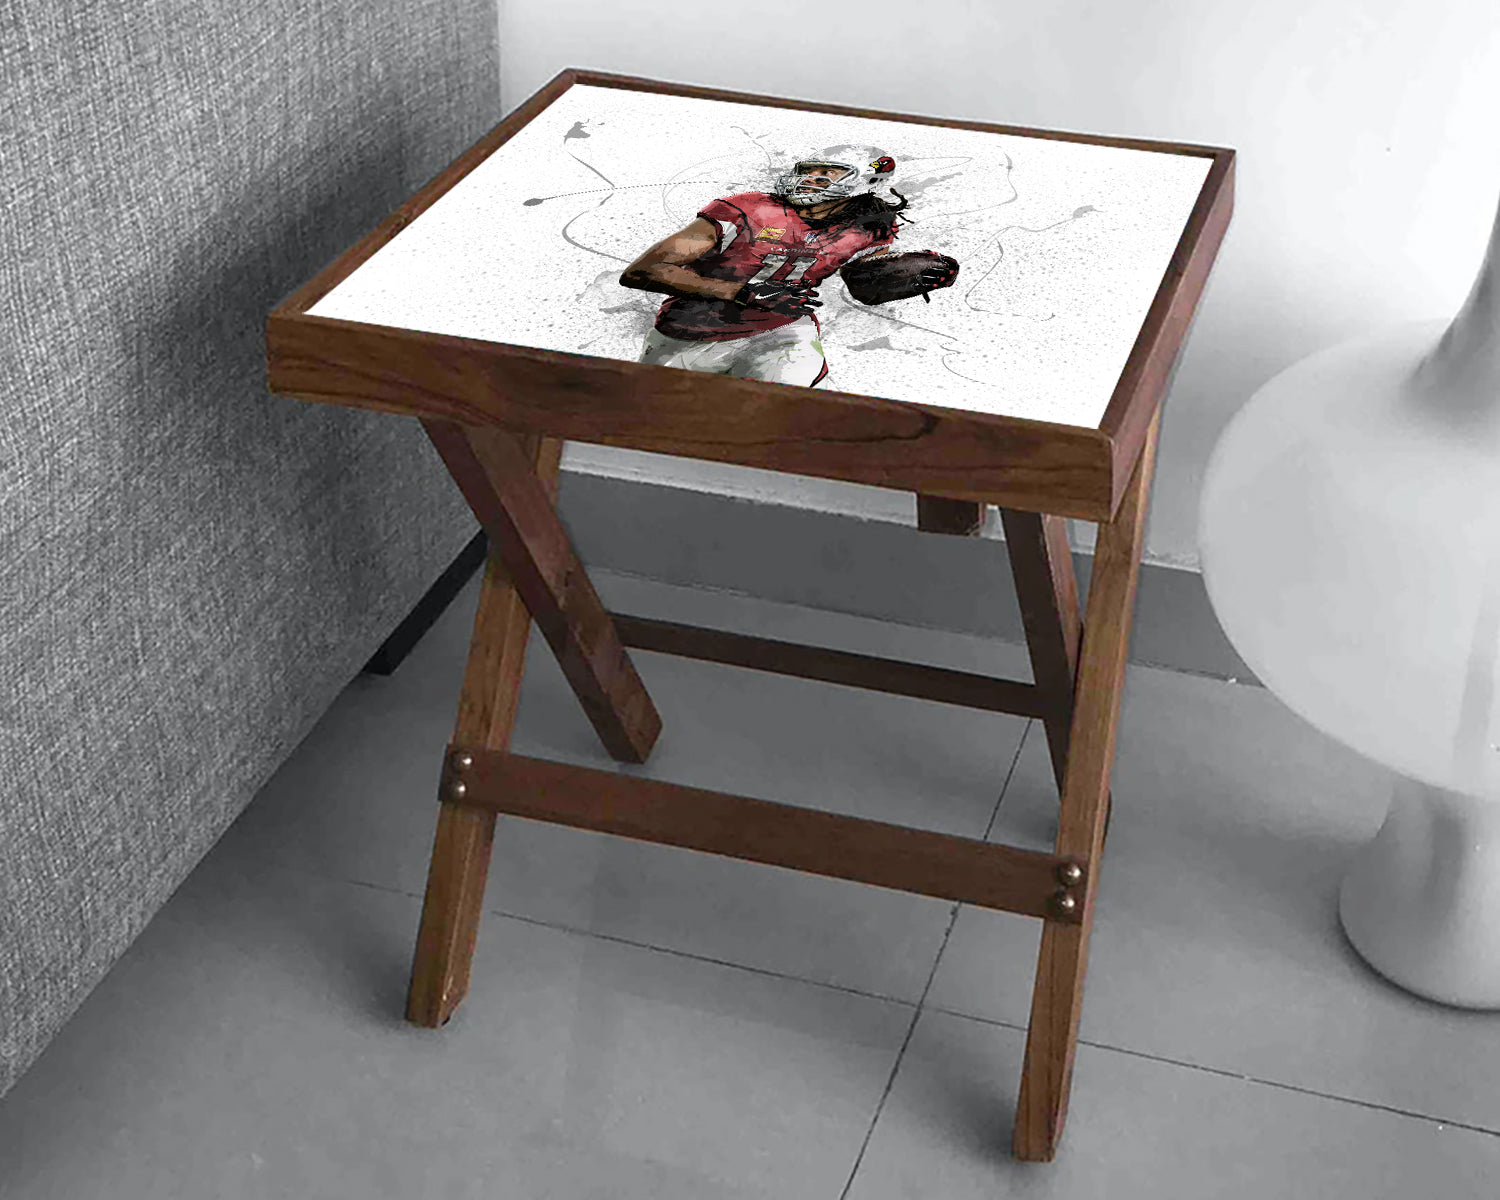 Larry Fitzgerald Splash Effect Coffee and Laptop Table 